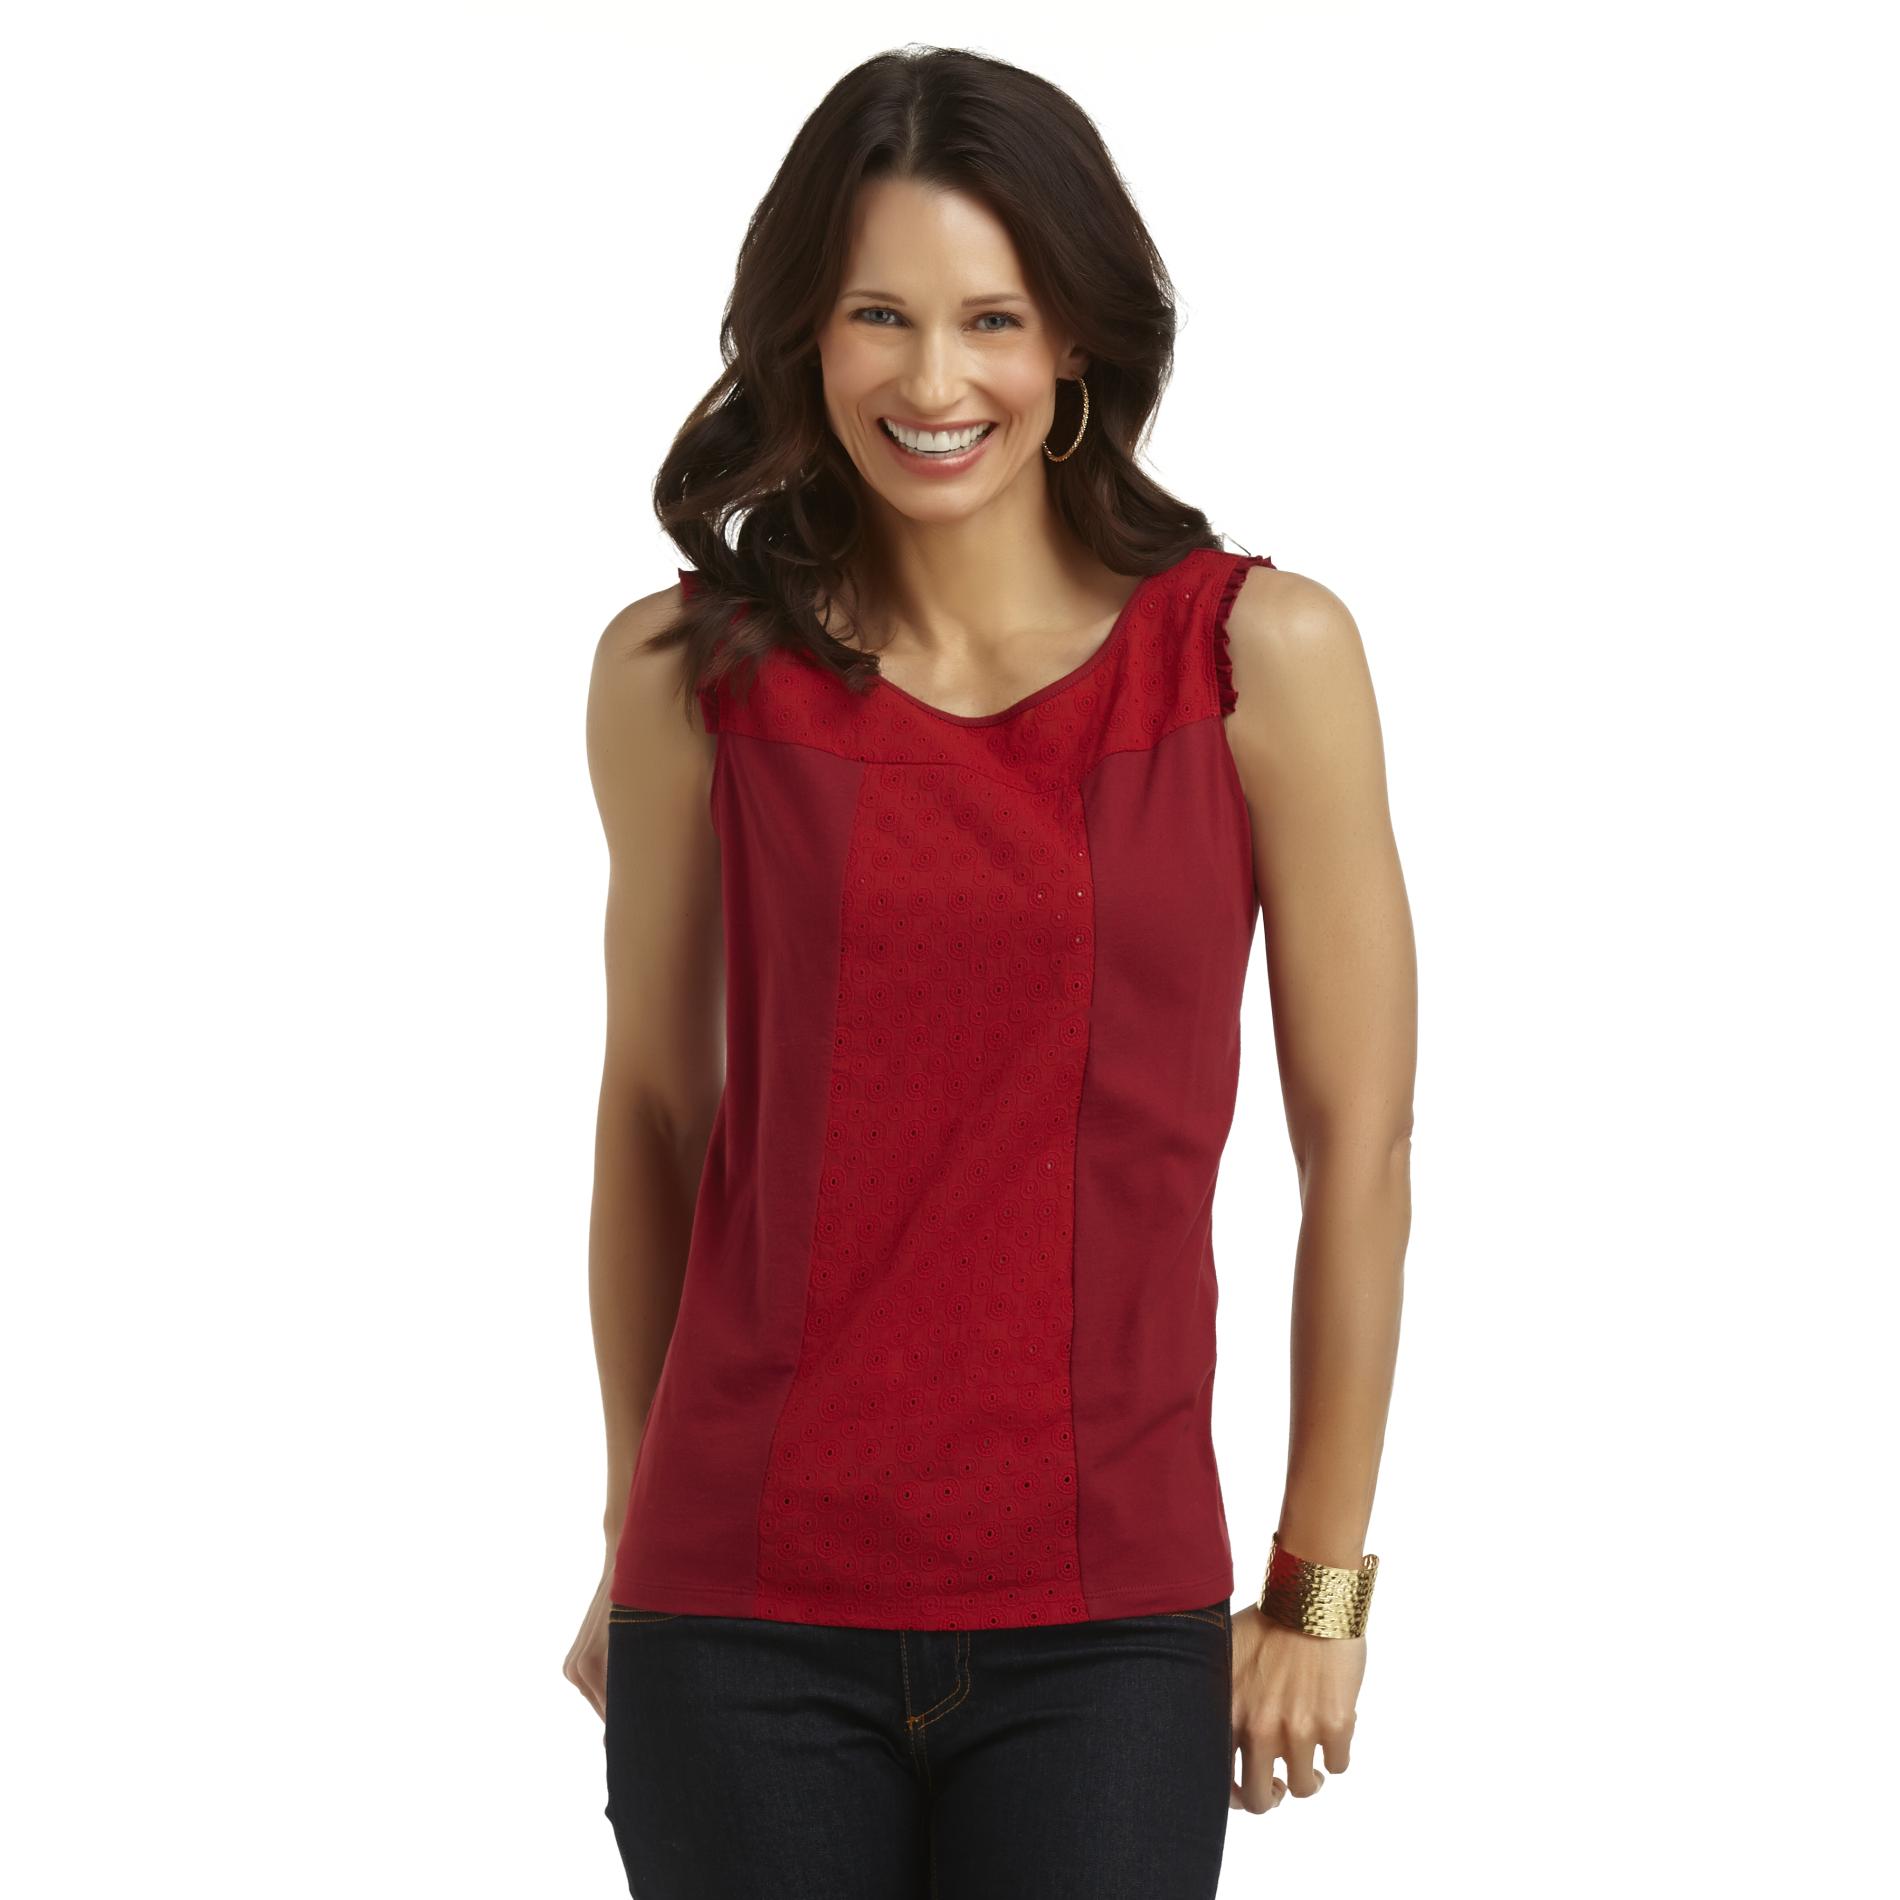 Basic Editions Women's Mixed Media Top